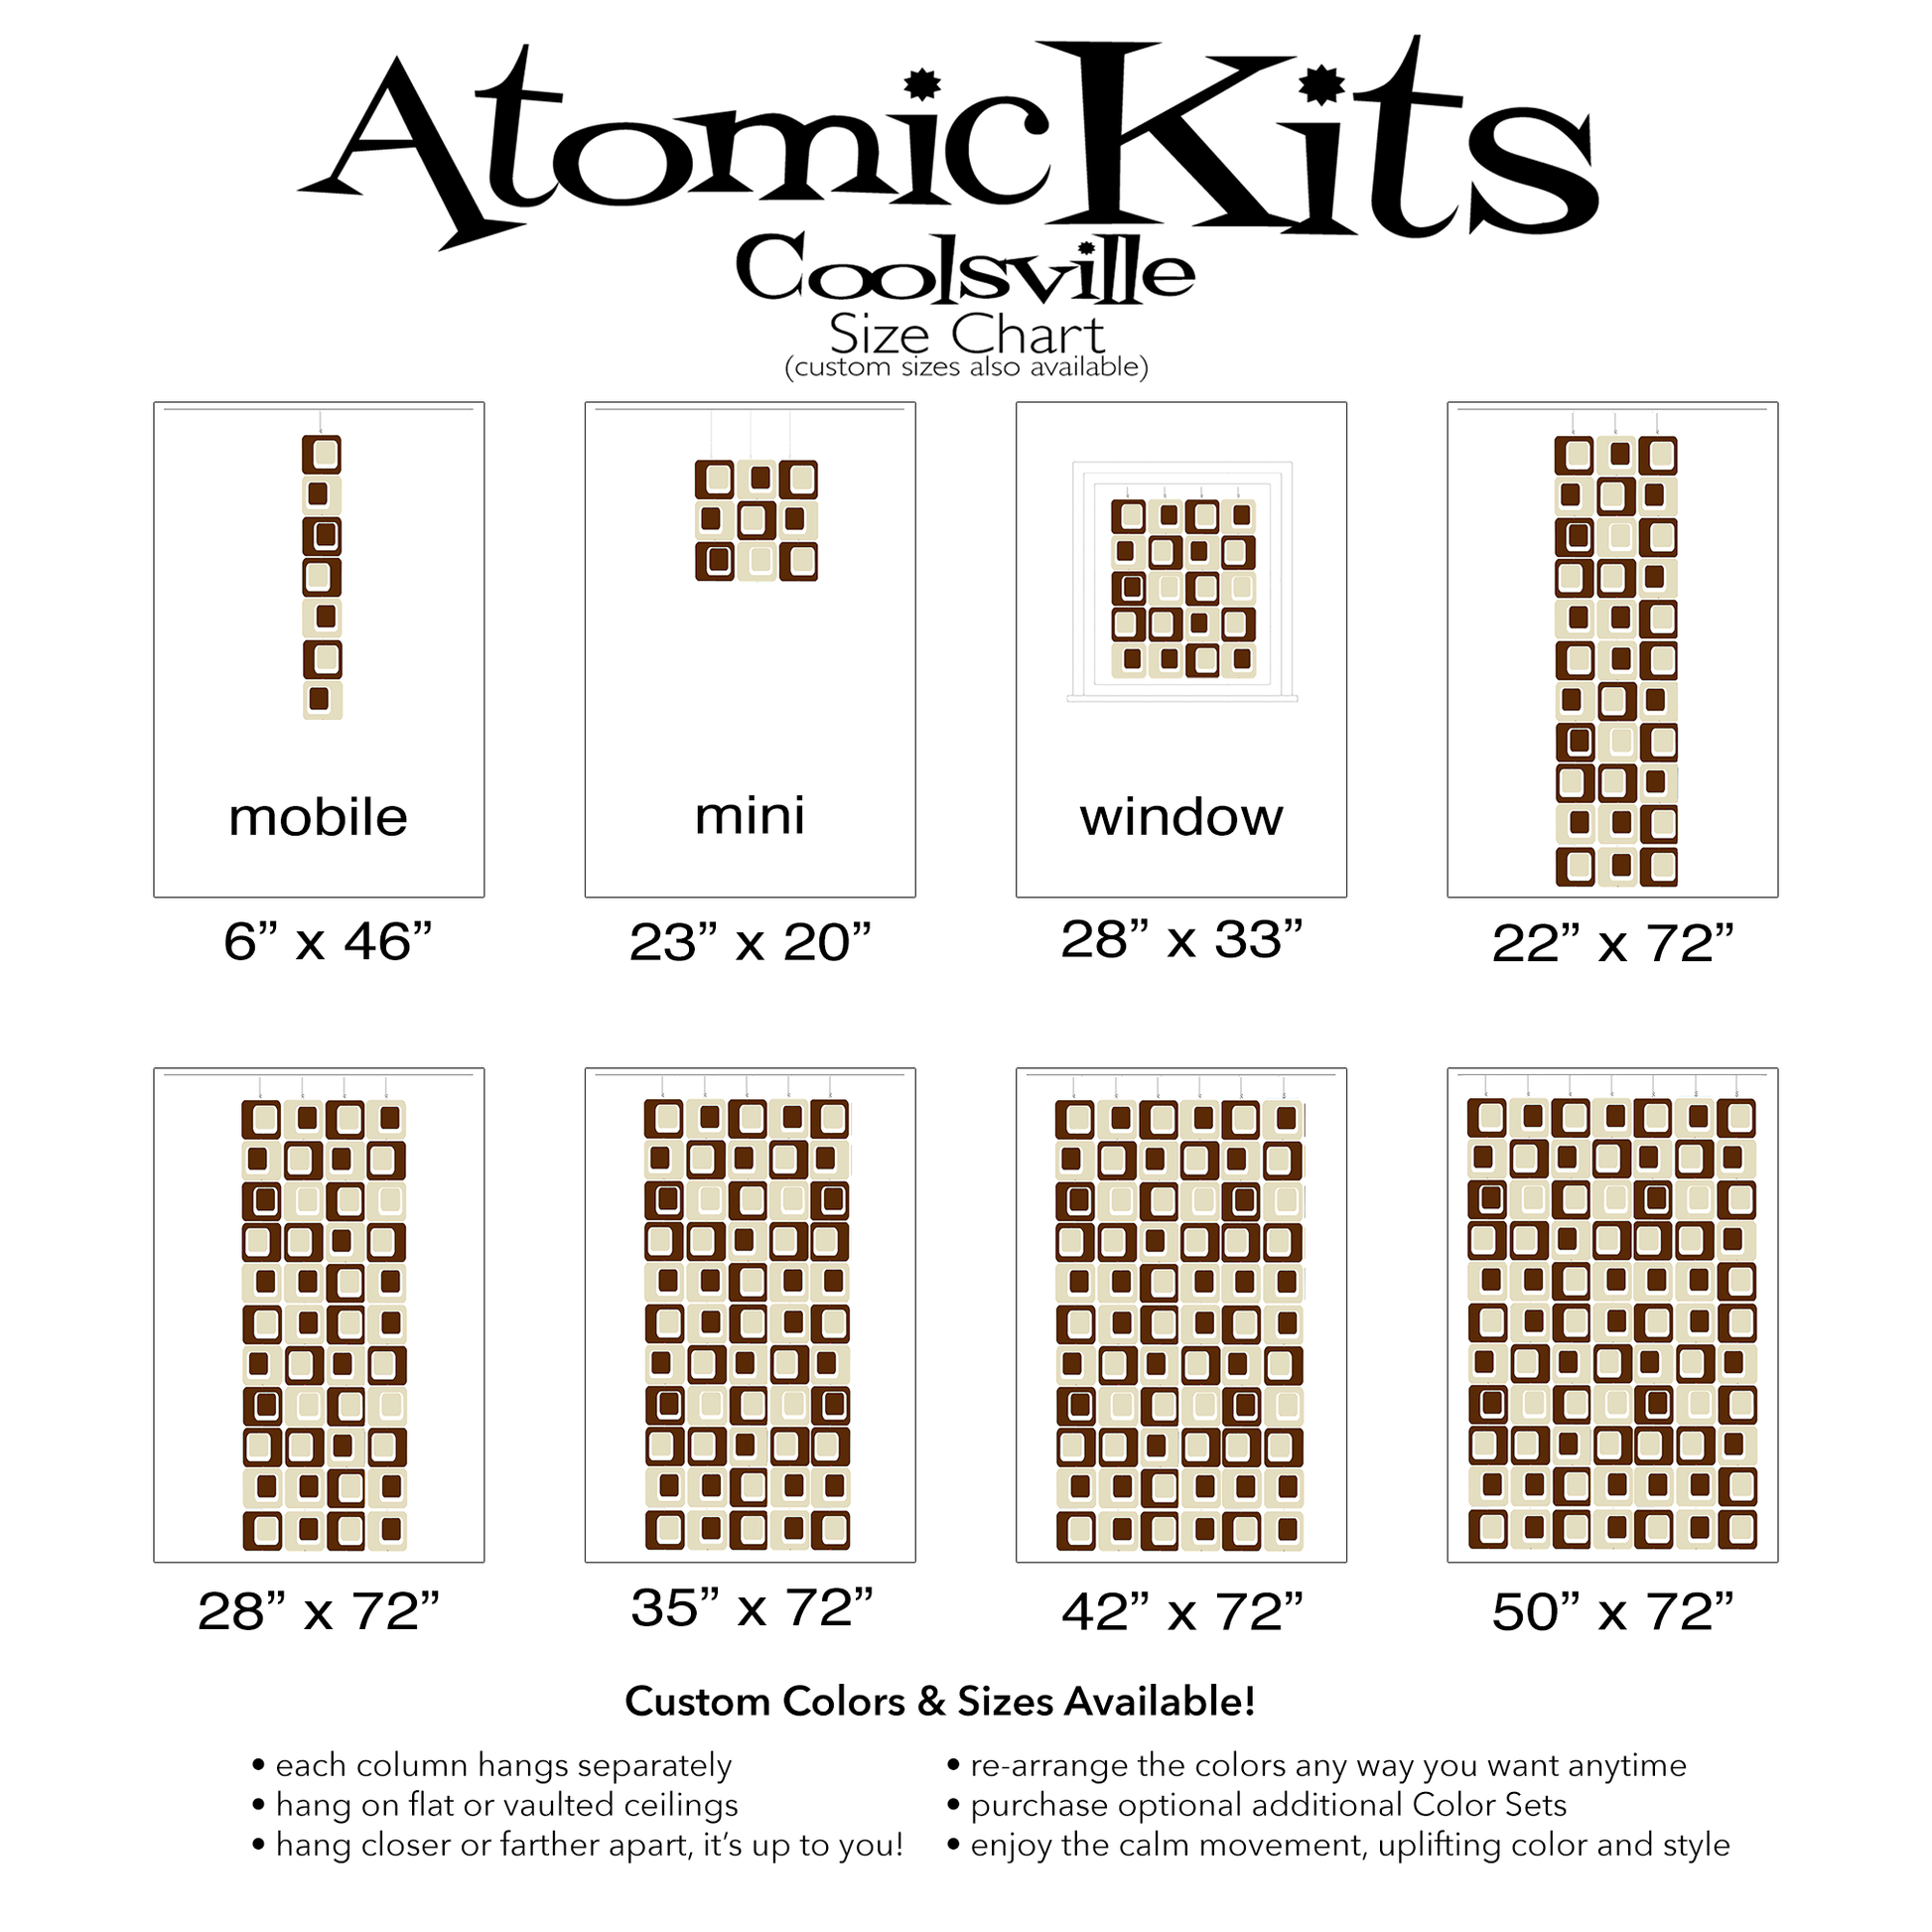 Size Chart for Coolsville in Cream and Brown Colors for Room Dividers, Curtains, Mobiles, and Wall Art DIY KIT by AtomicMobiles.com